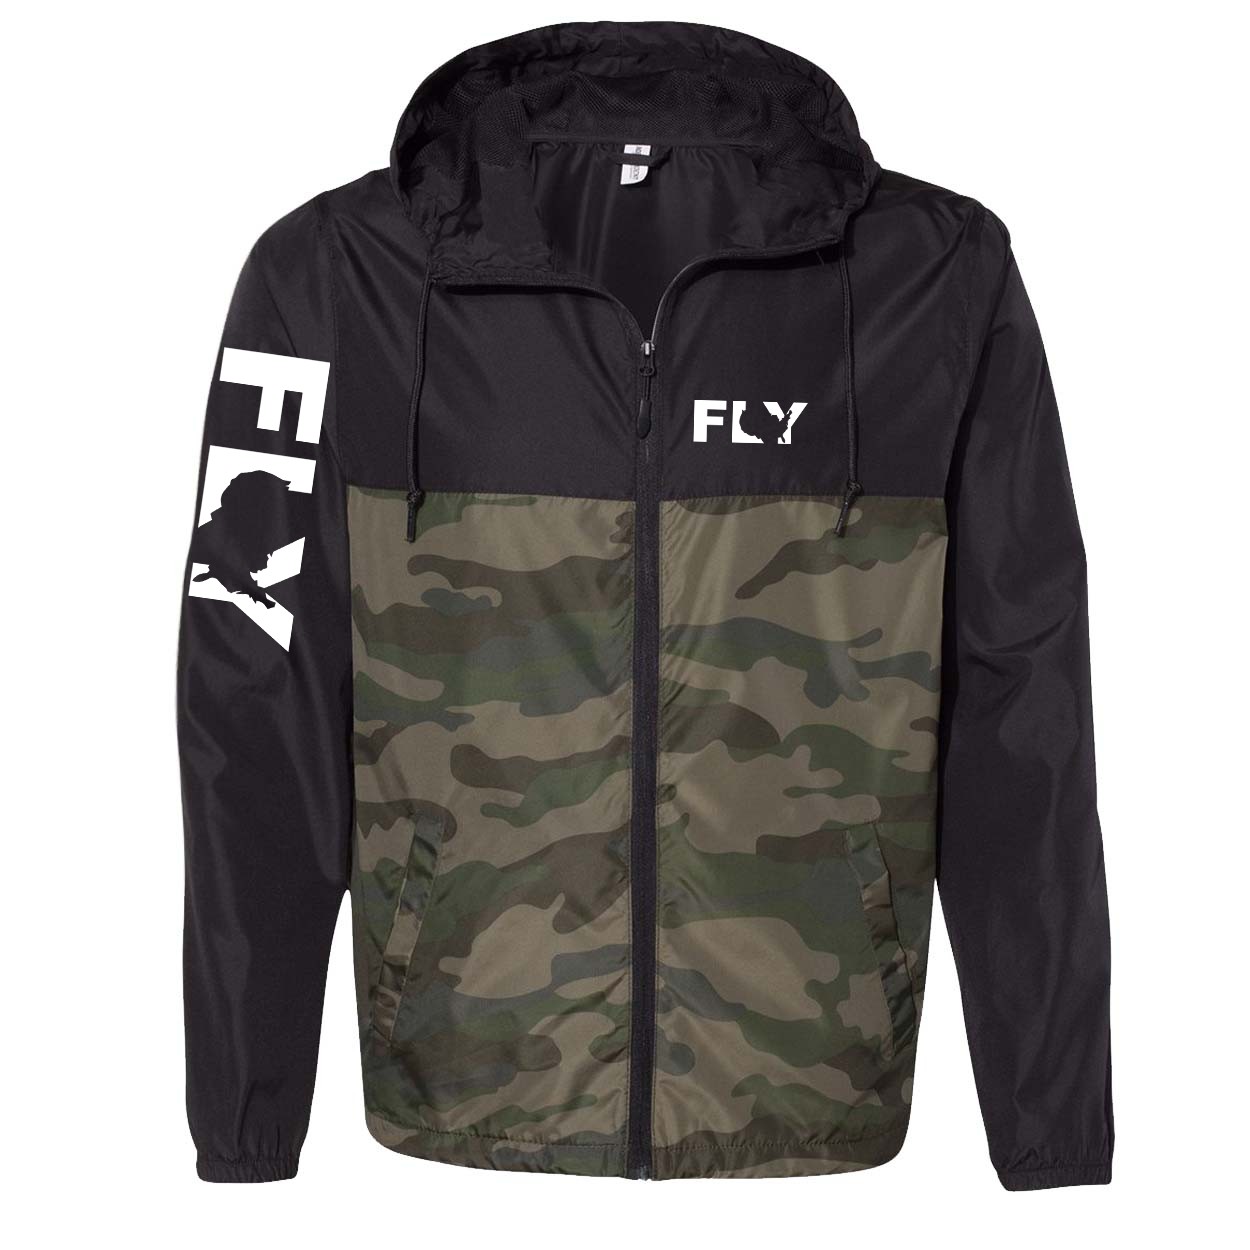 Fly United States Classic Lightweight Windbreaker Black/Forest Camo (White Logo)